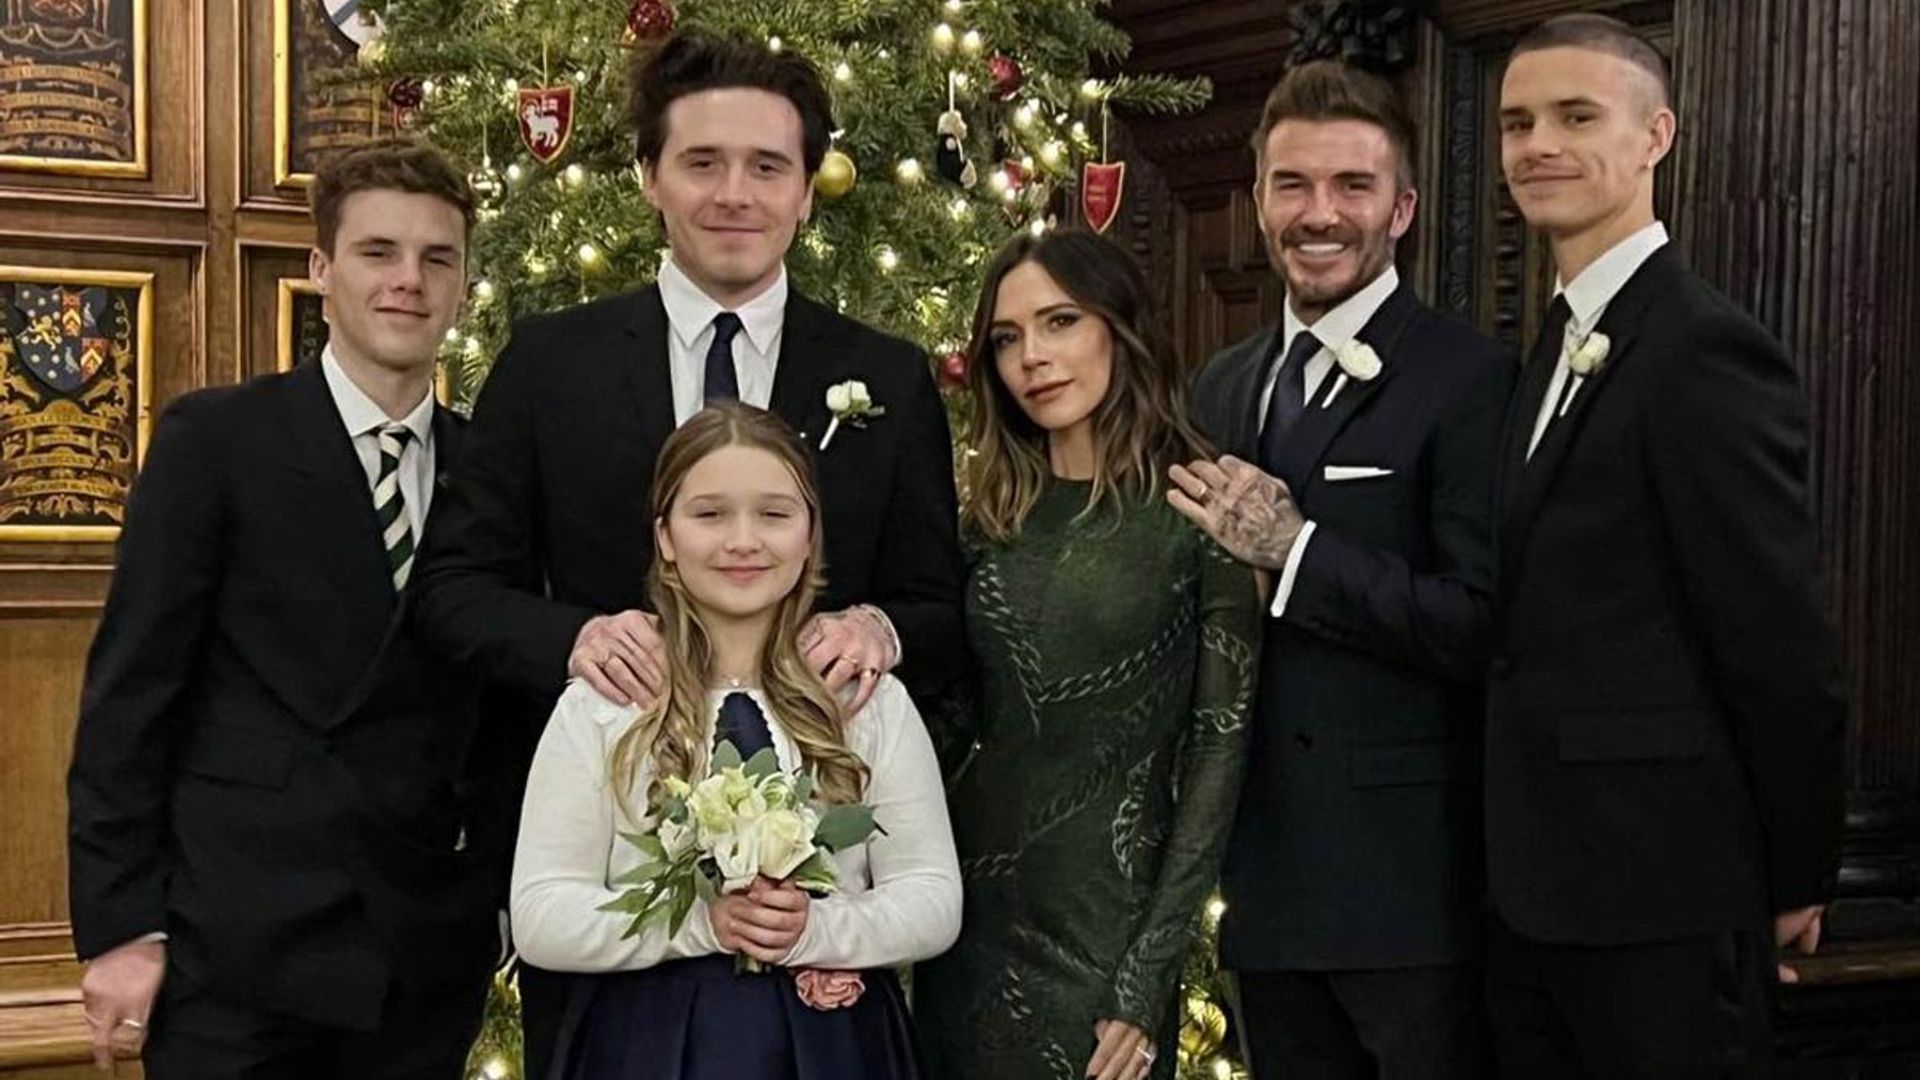 Victoria Beckham gushes about son Brooklyn in emotional post amid Nicola Peltz wedding rumours